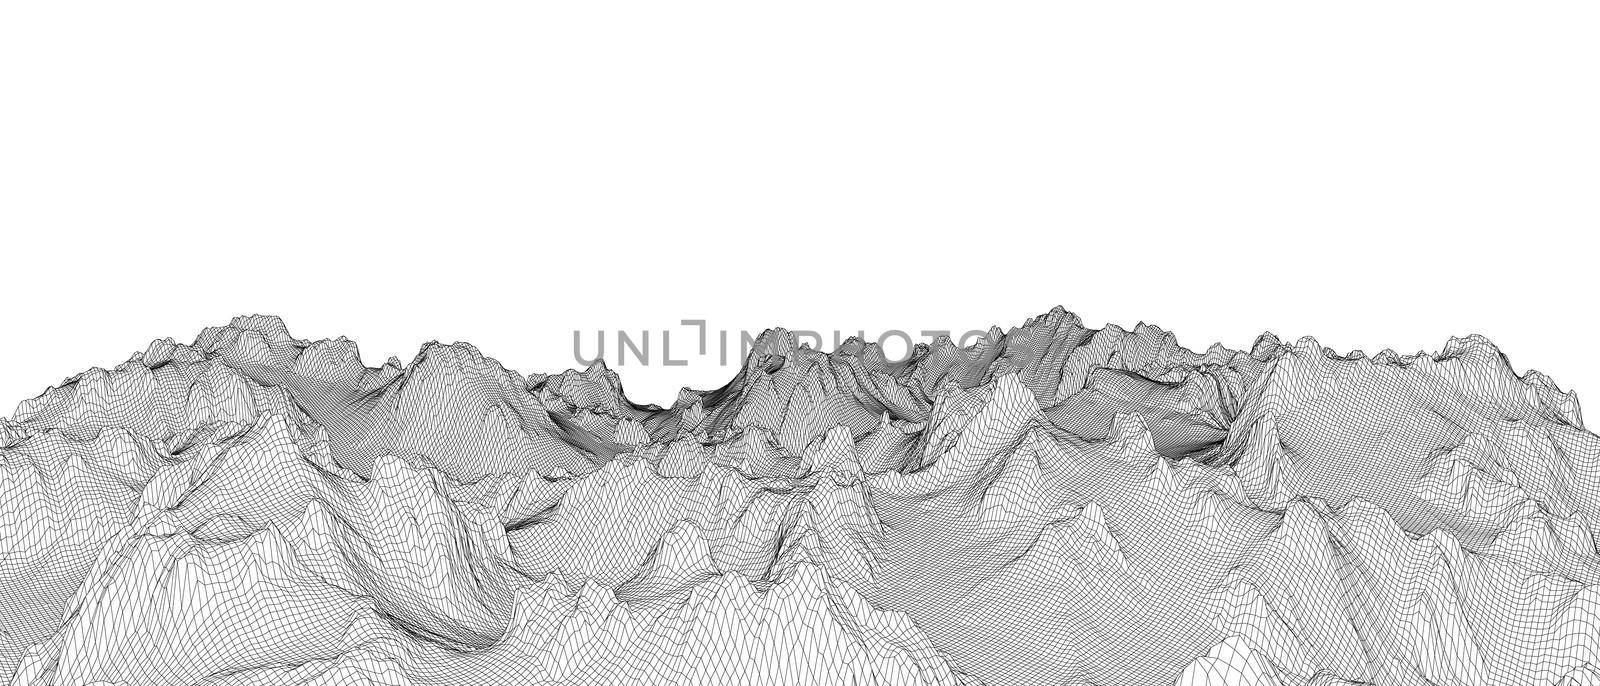 Abstract 3d wire-frame landscape. Blueprint style. 3d illustration. Geology Terrain